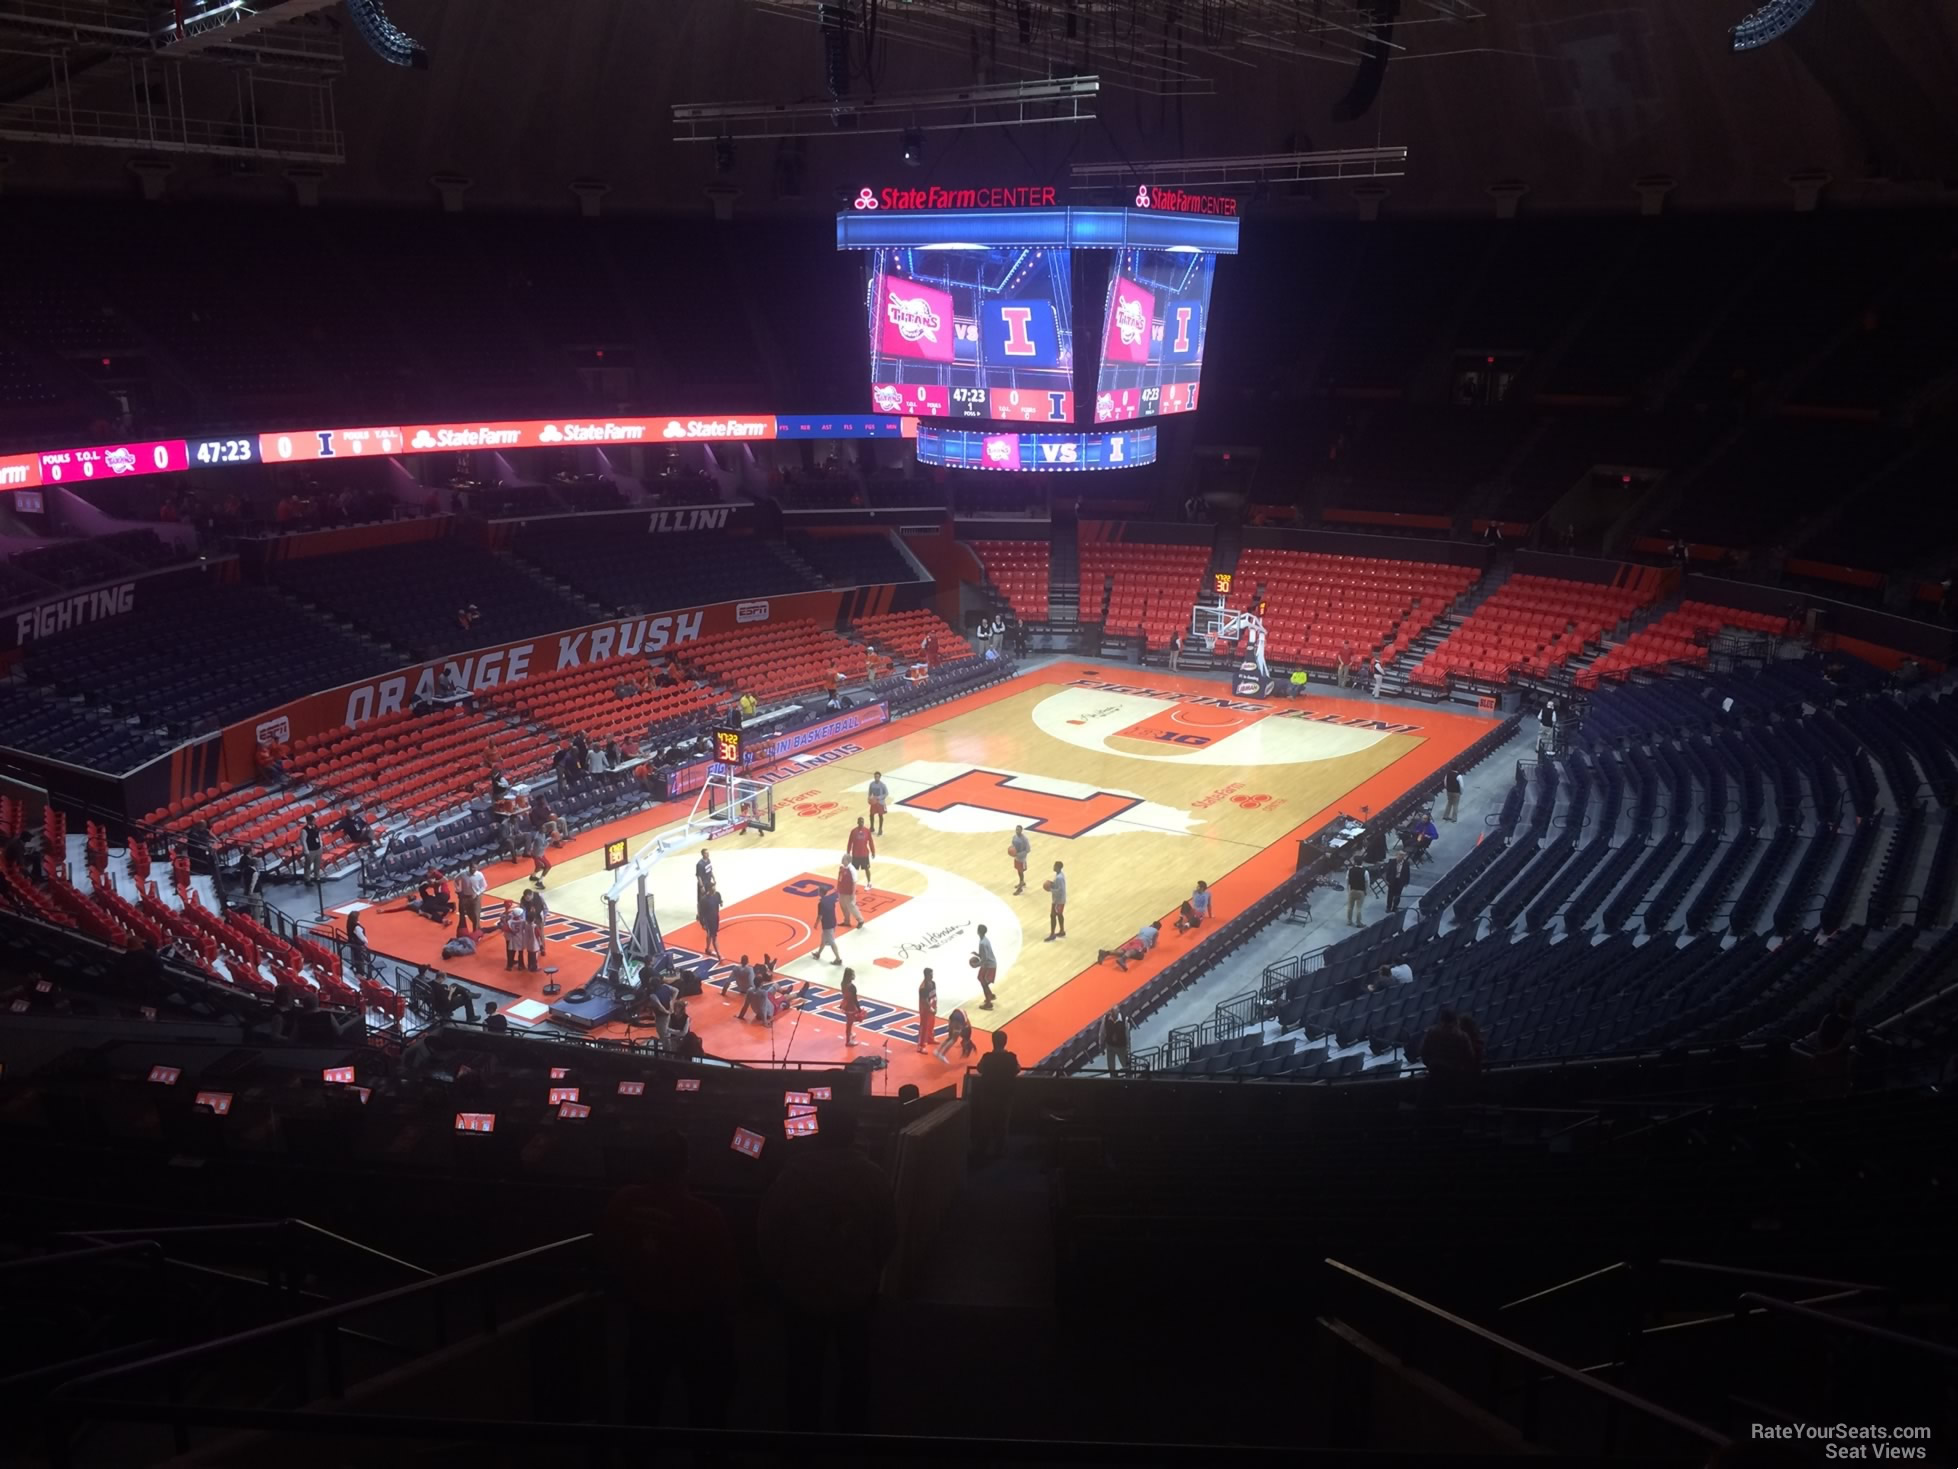 section 209, row 10 seat view  - state farm center